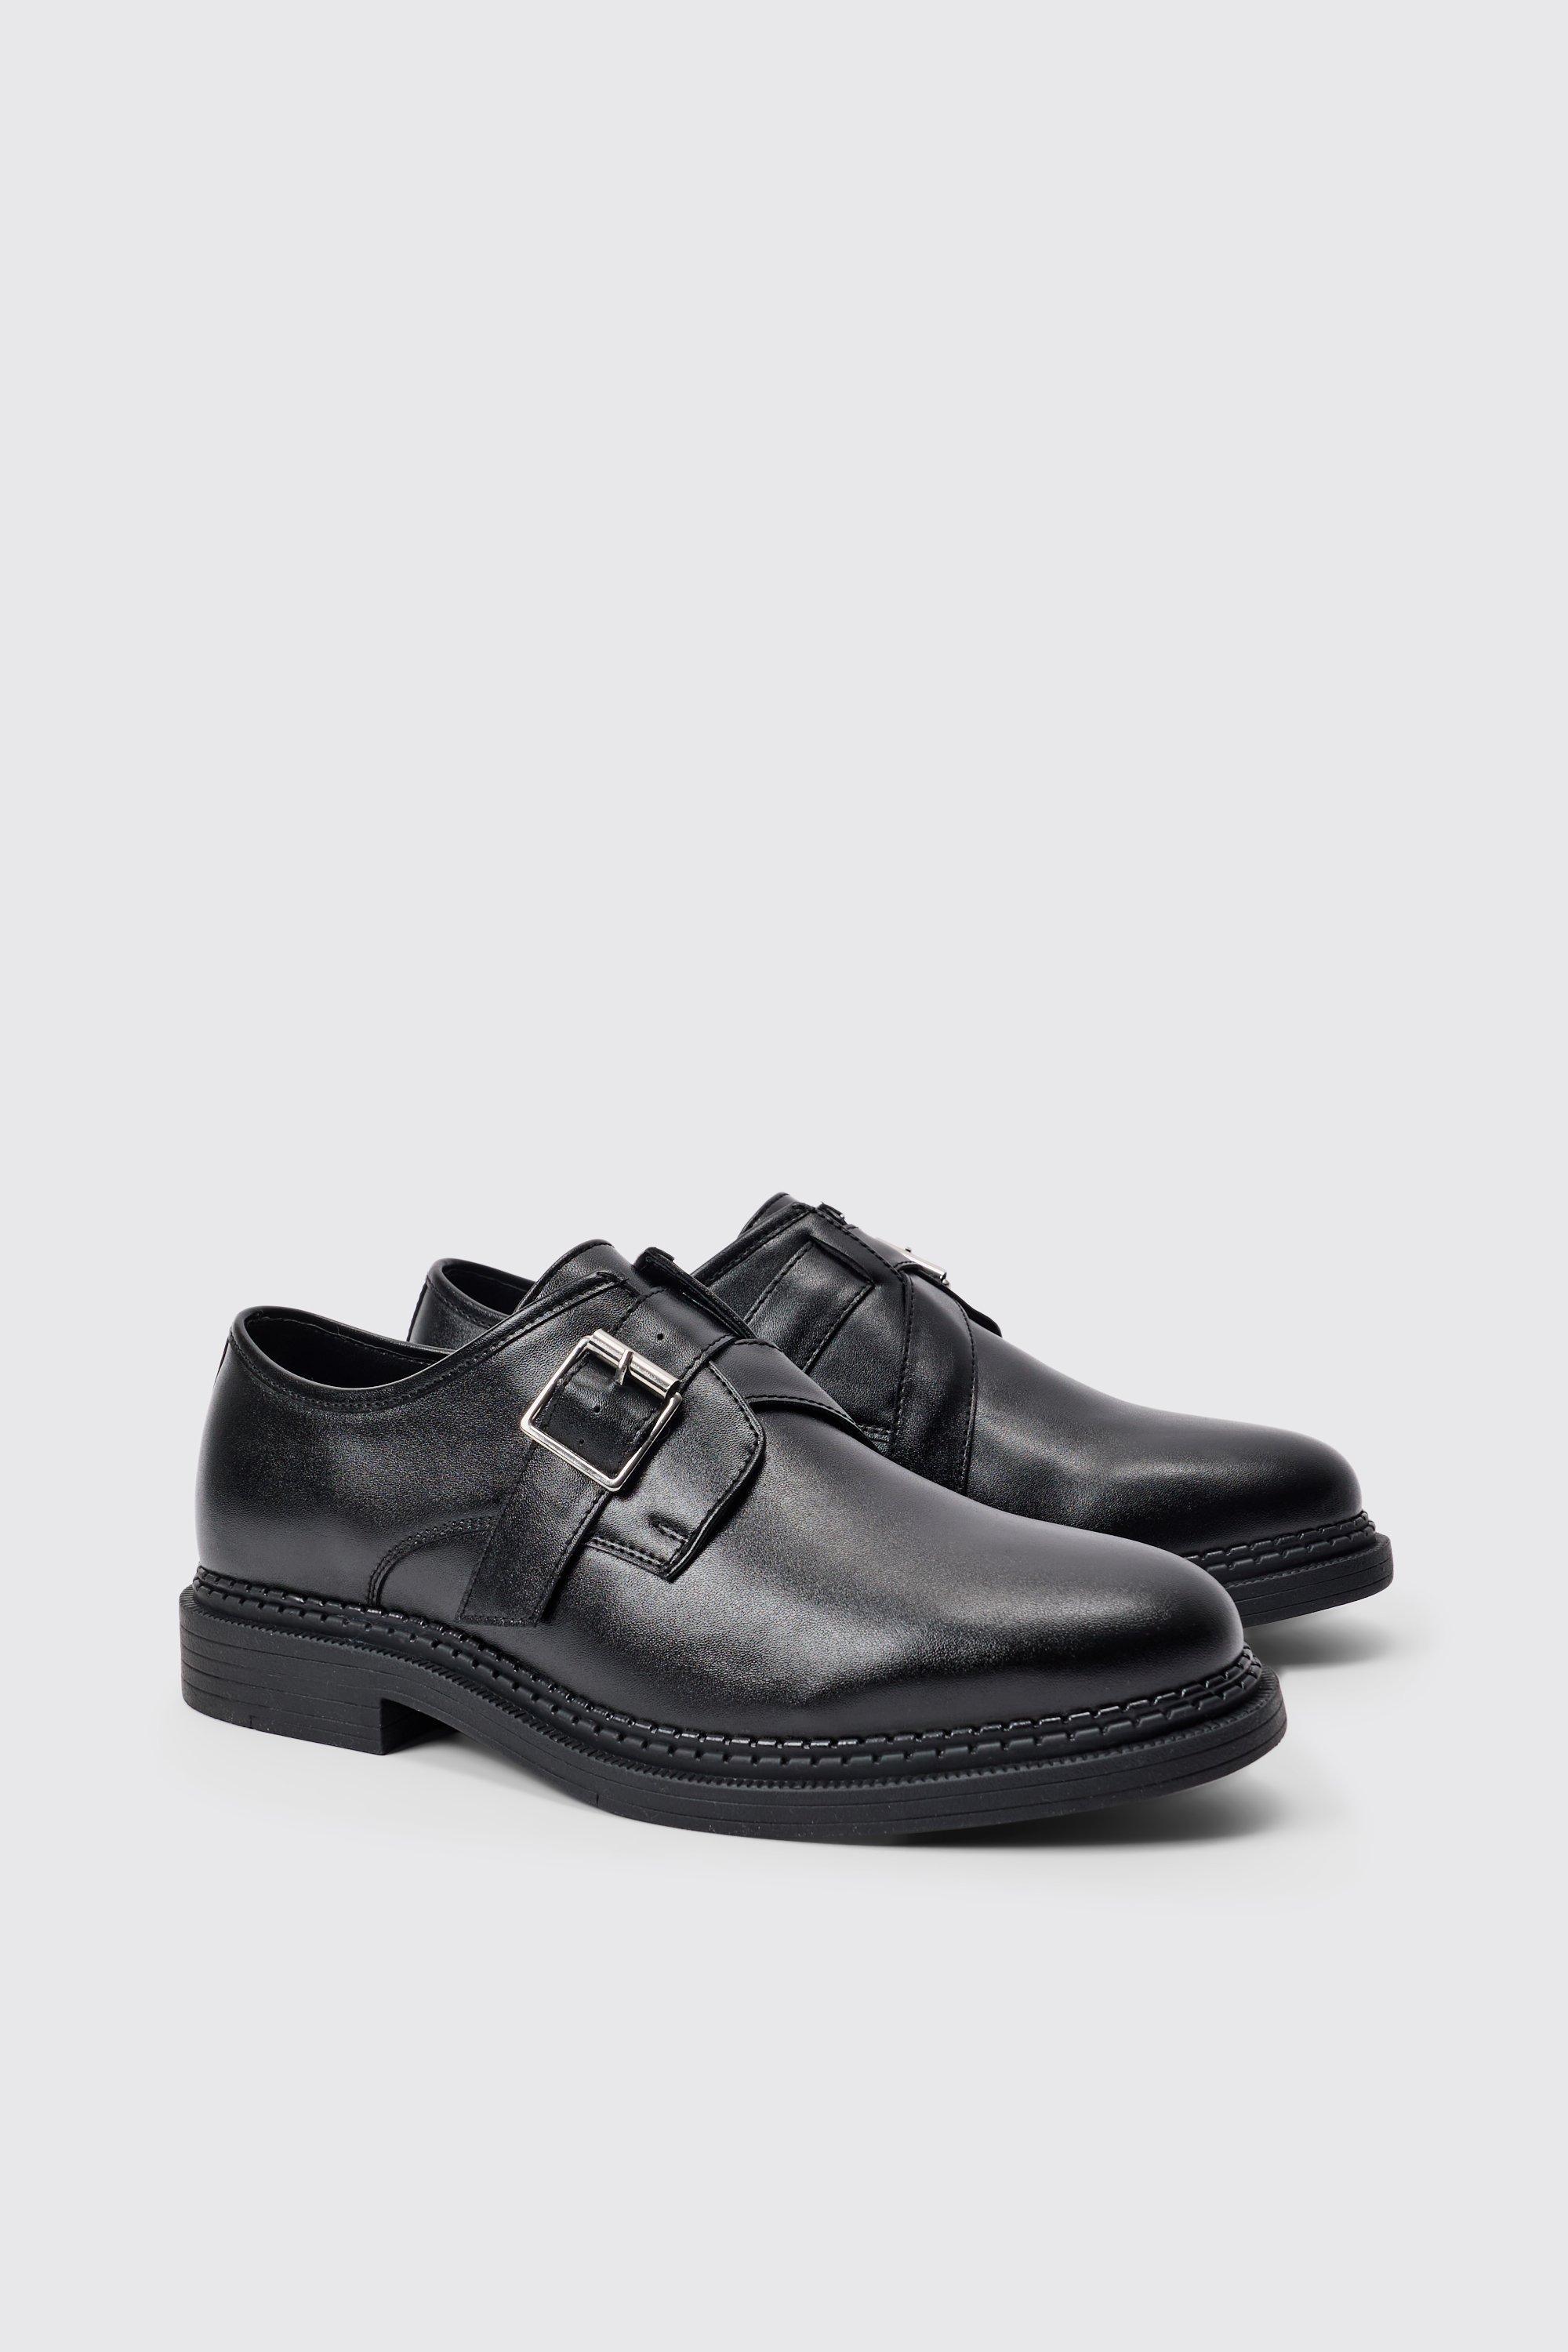 Image of Pu Cross Over Strap Detail Loafer In Black, Nero